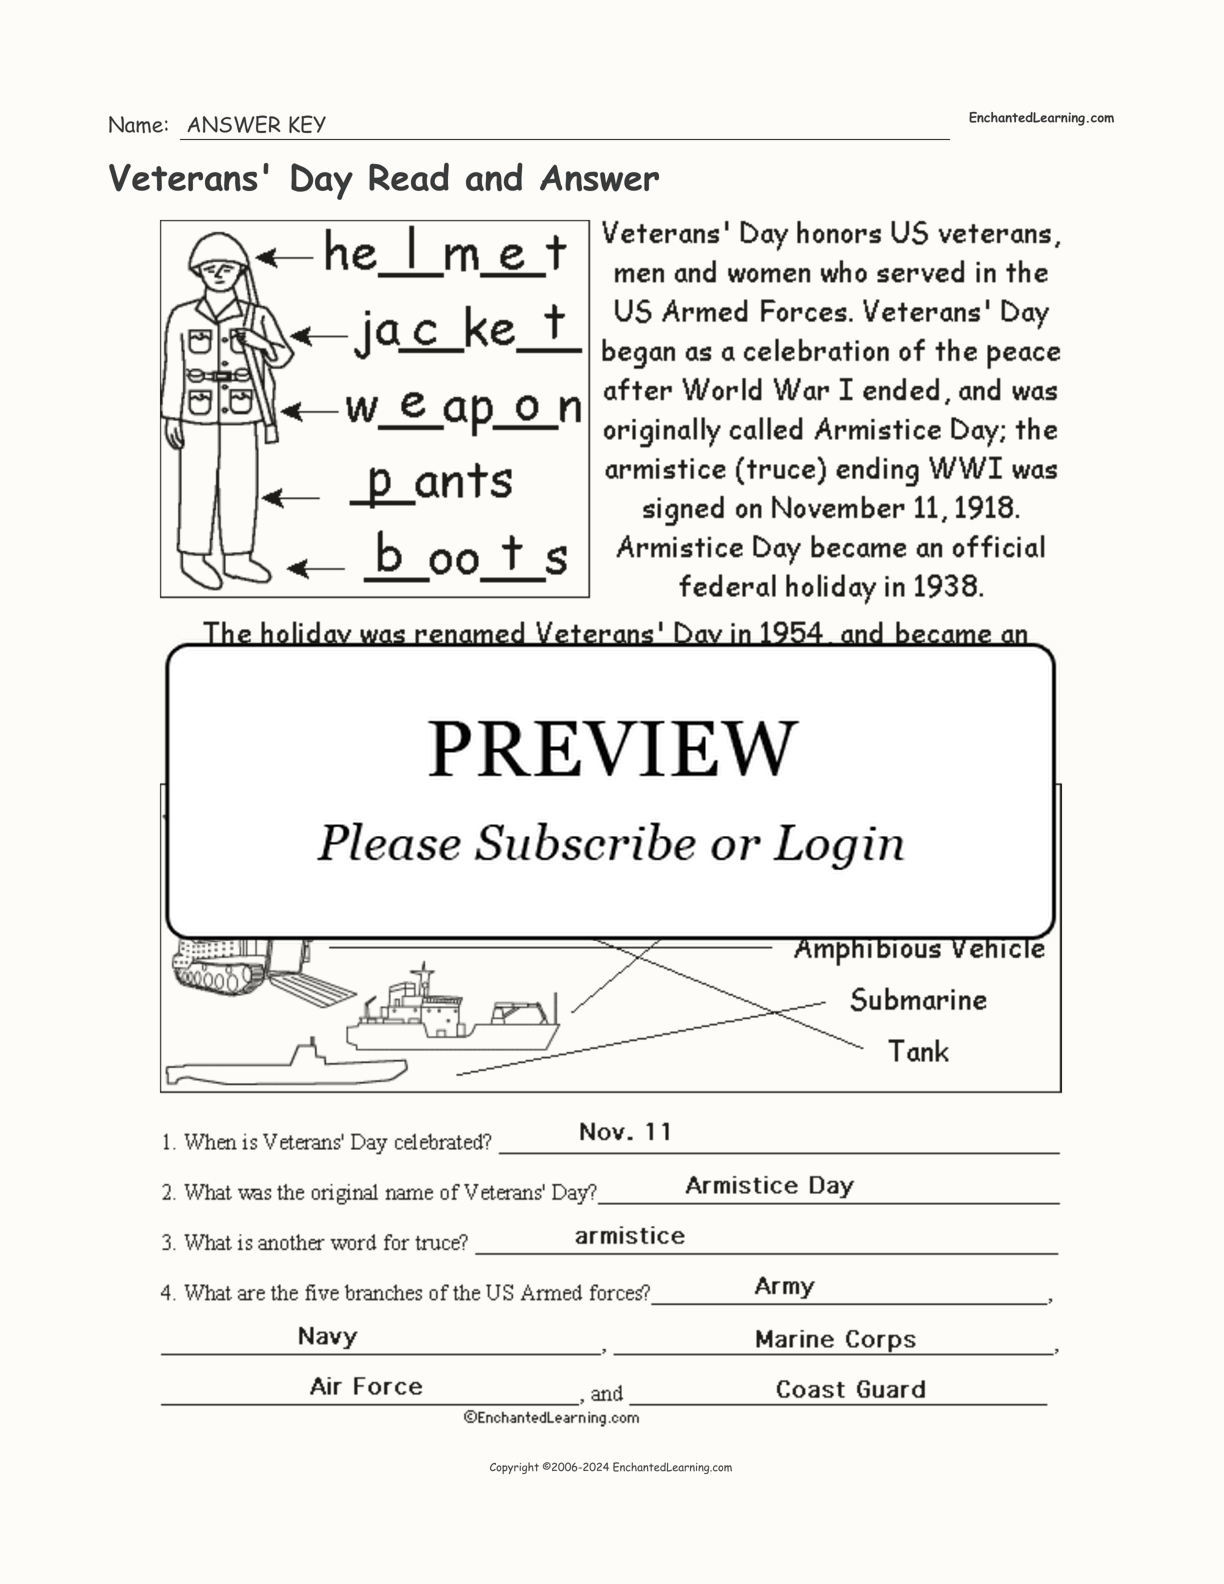 Veterans' Day Read and Answer interactive worksheet page 2